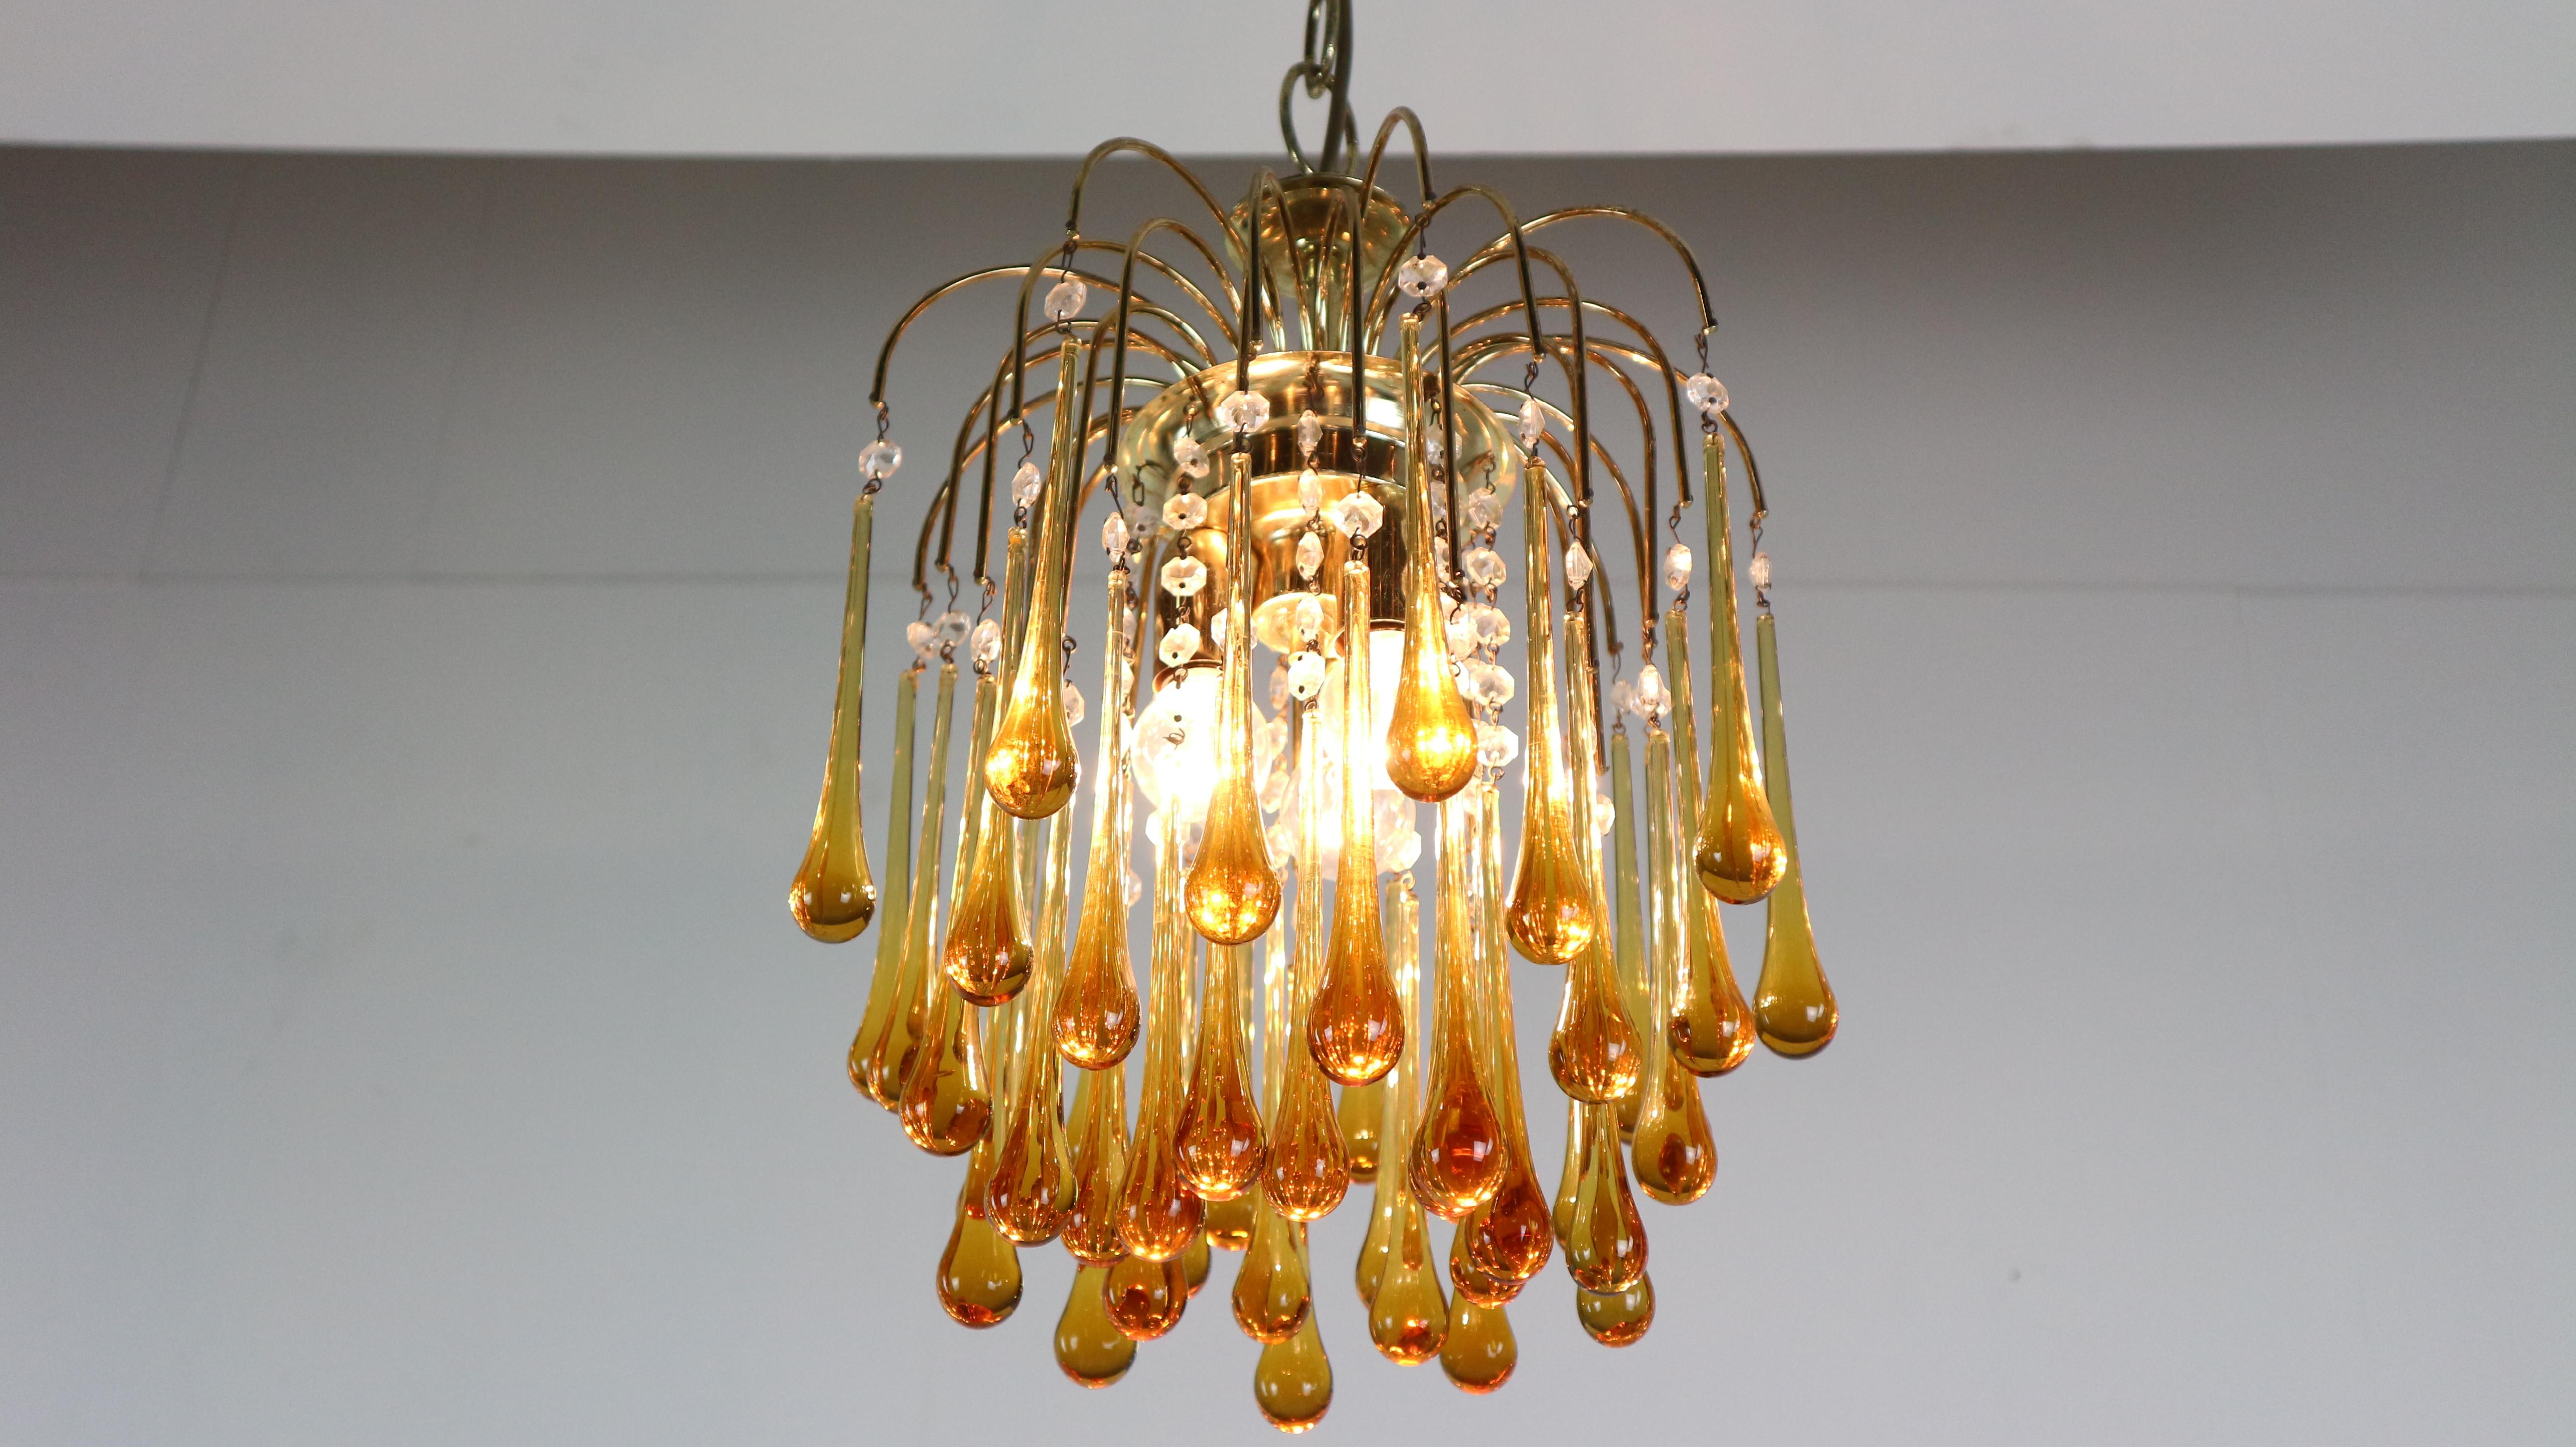 Vintage Murano glass chandelier designed by Paolo Venini in the 1960s, Italy.
44 amber glass teardrops with clear glass pearls. The glass cascades to reveal a fountain of light.